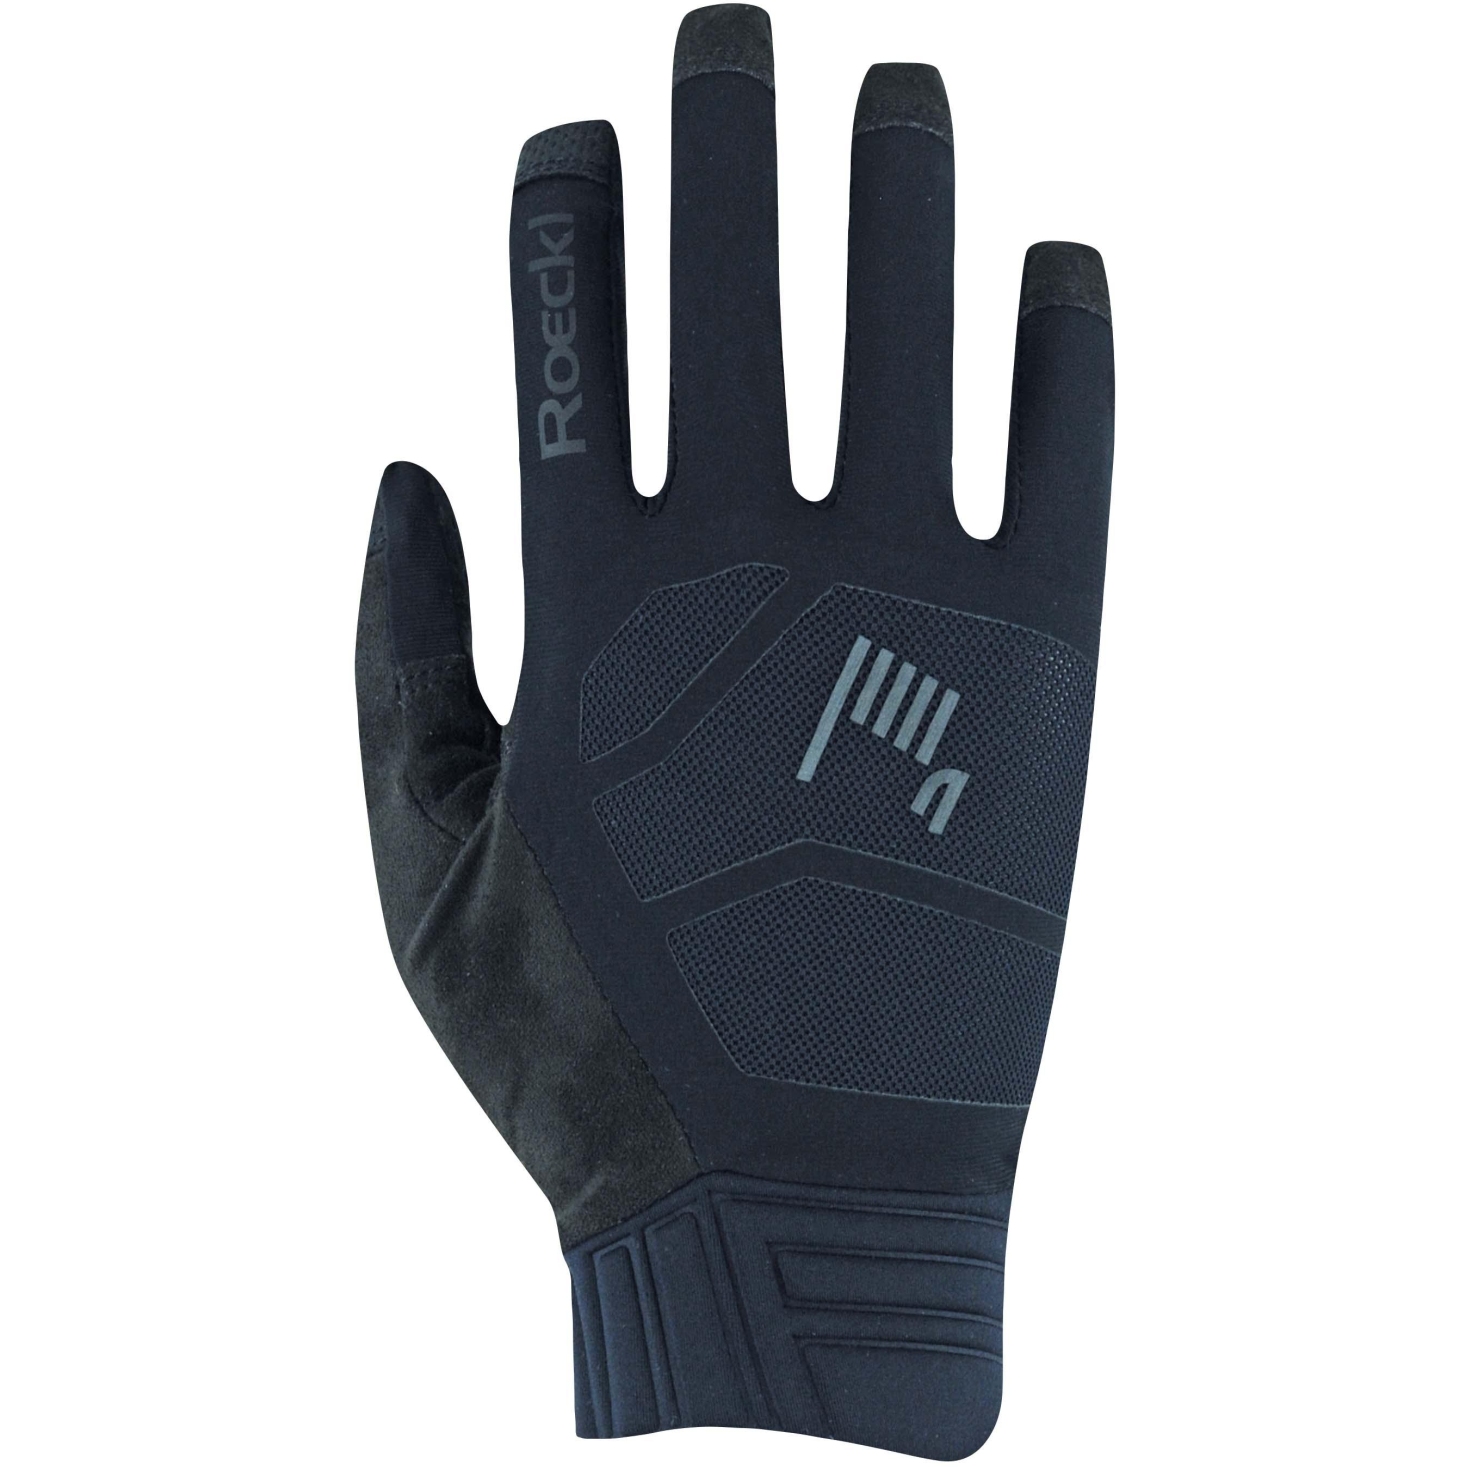 Picture of Roeckl Sports Murnau Cycling Gloves - black 9000